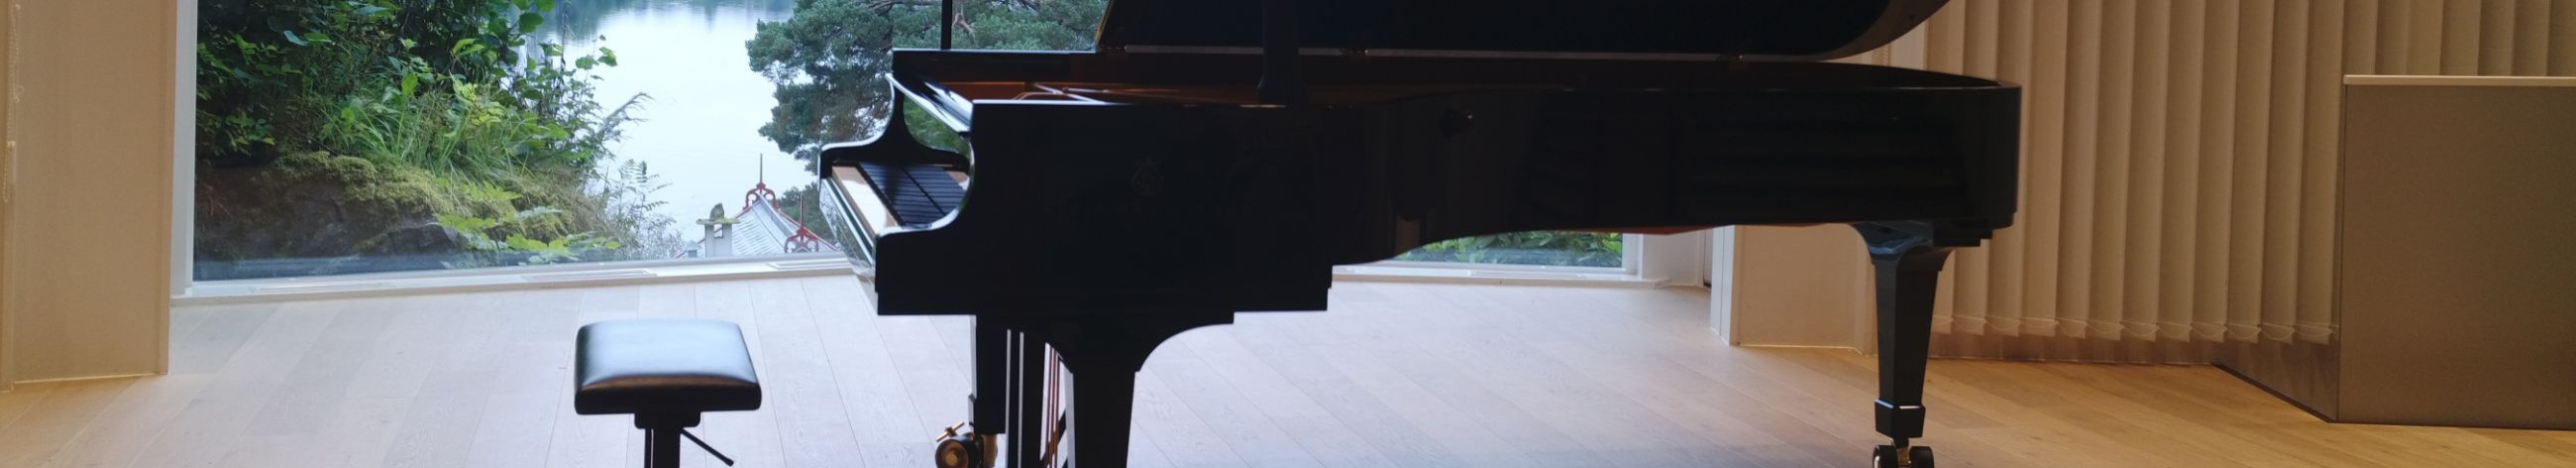 We specialize in piano repair, renovation, and tuning, ensuring each instrument performs at its best.